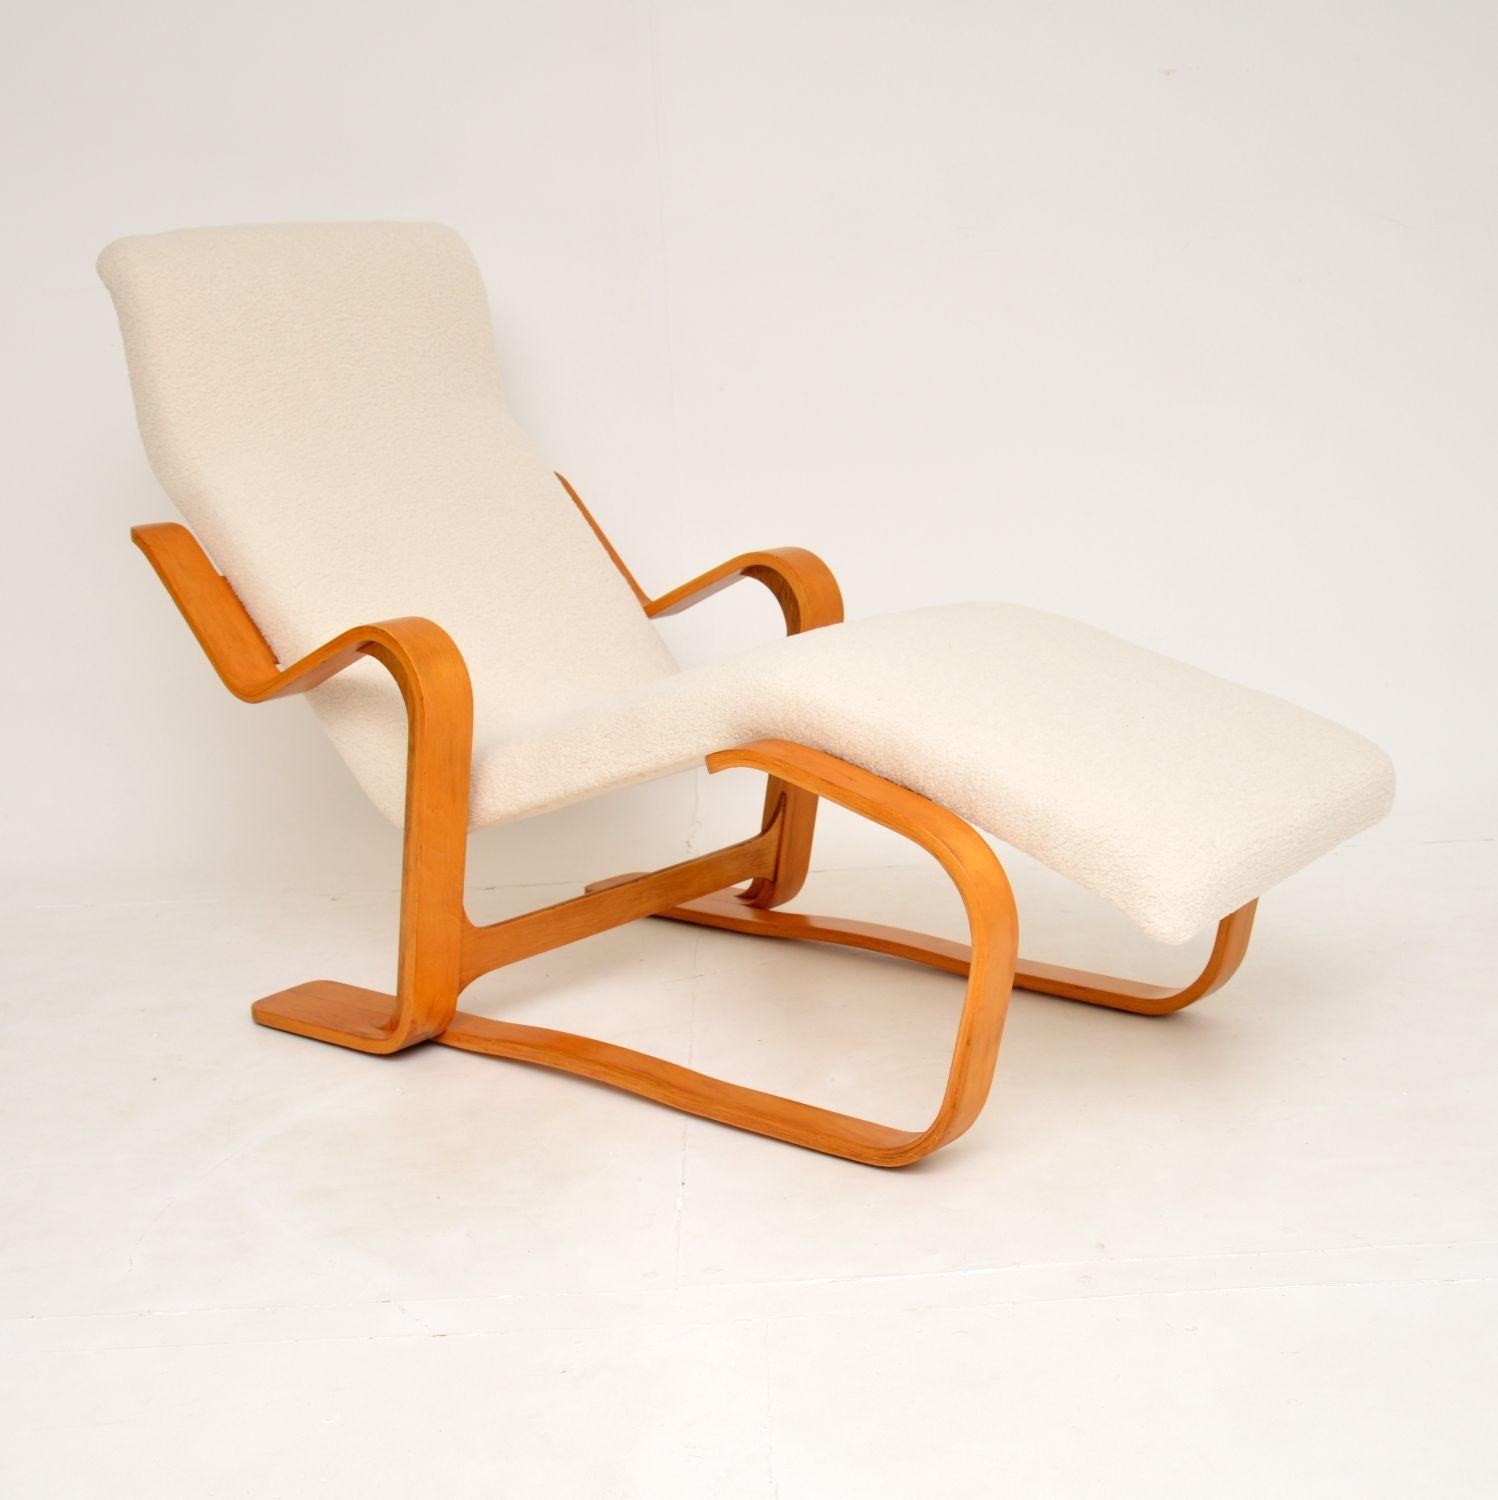 A stunning and iconic vintage chaise longue, designed by Marcel Breuer in 1935. This was made by the Isokon furniture company in London, it dates from the 1950’s.

The frame is beautifully made from laminated birch, and we have just had this